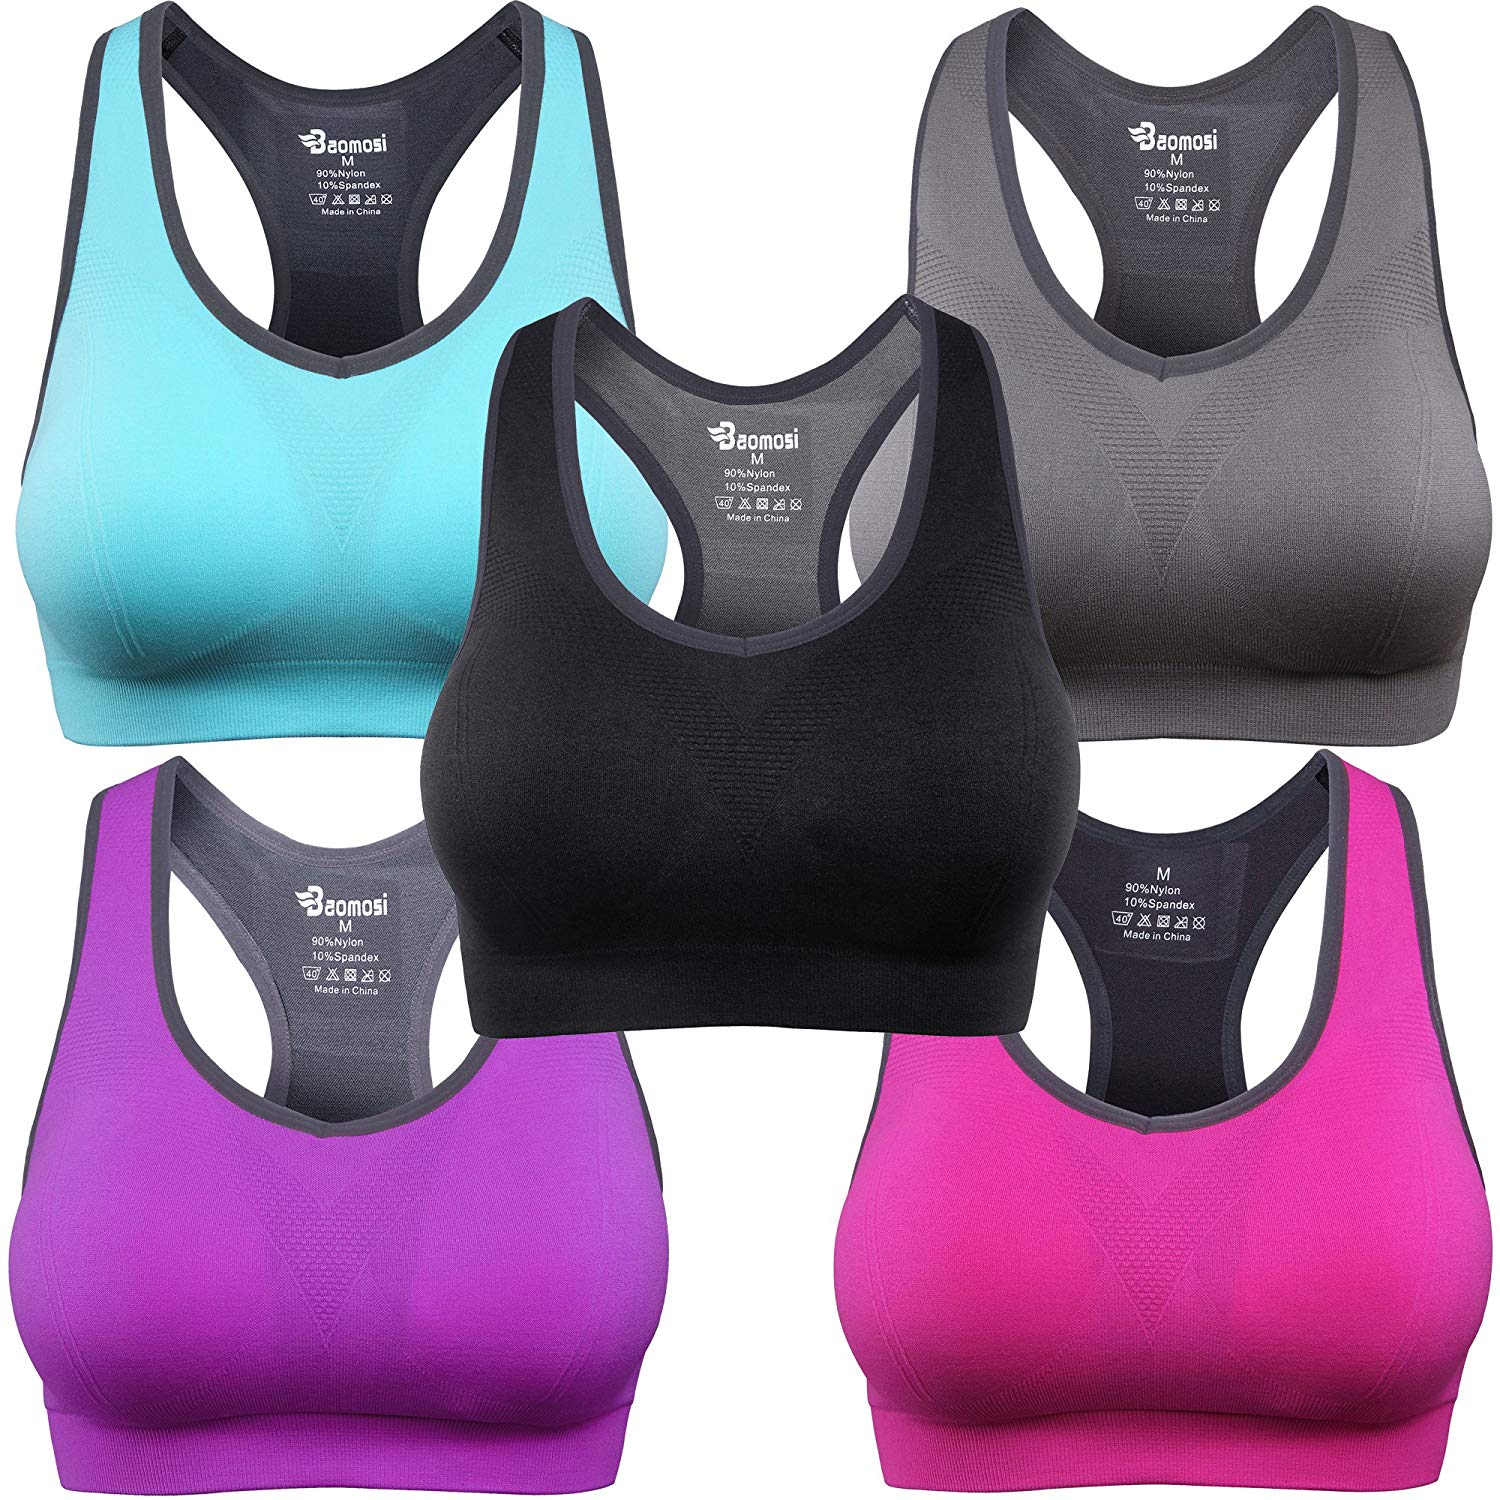 Top 10 Best Sports Bras in 2021 Reviews | Buyer's Guide